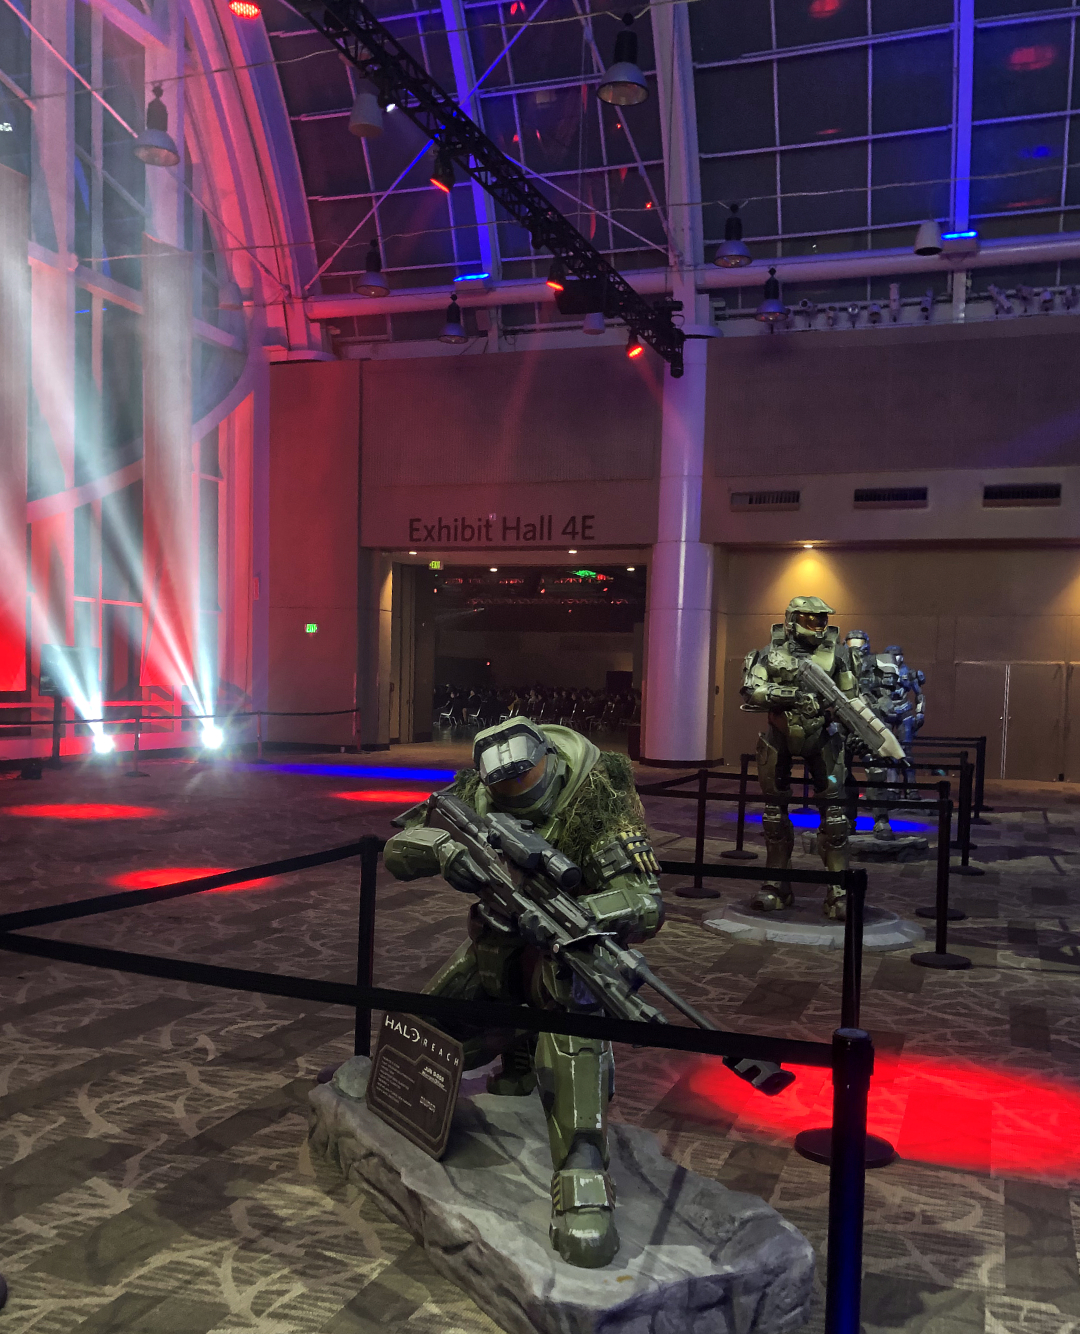 The different Spartan statues, as seen right as attendees head to the stage.